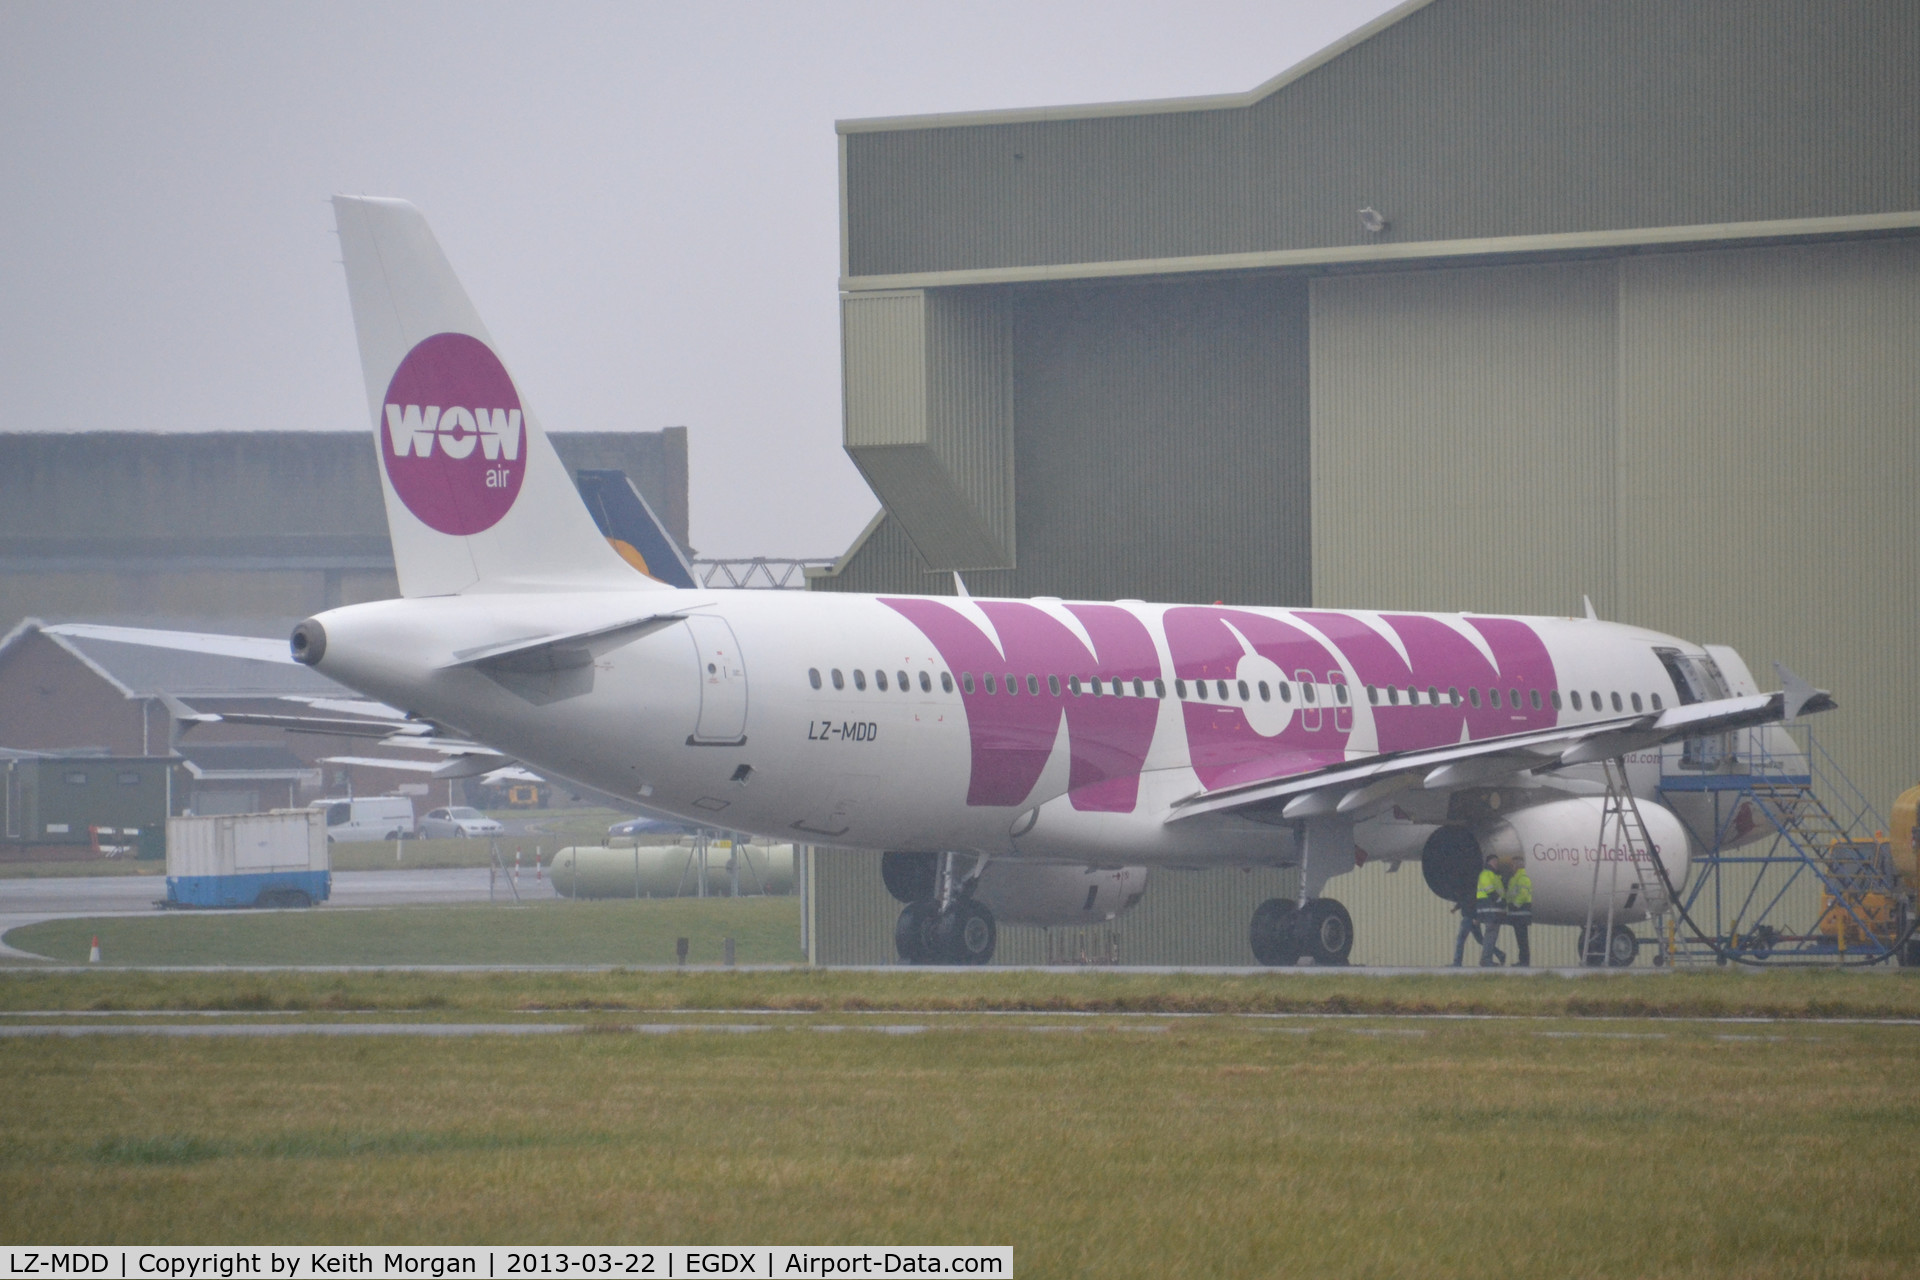 LZ-MDD, 2010 Airbus A320-232 C/N 4305, Taken at St Athan in New WOW Air Markings